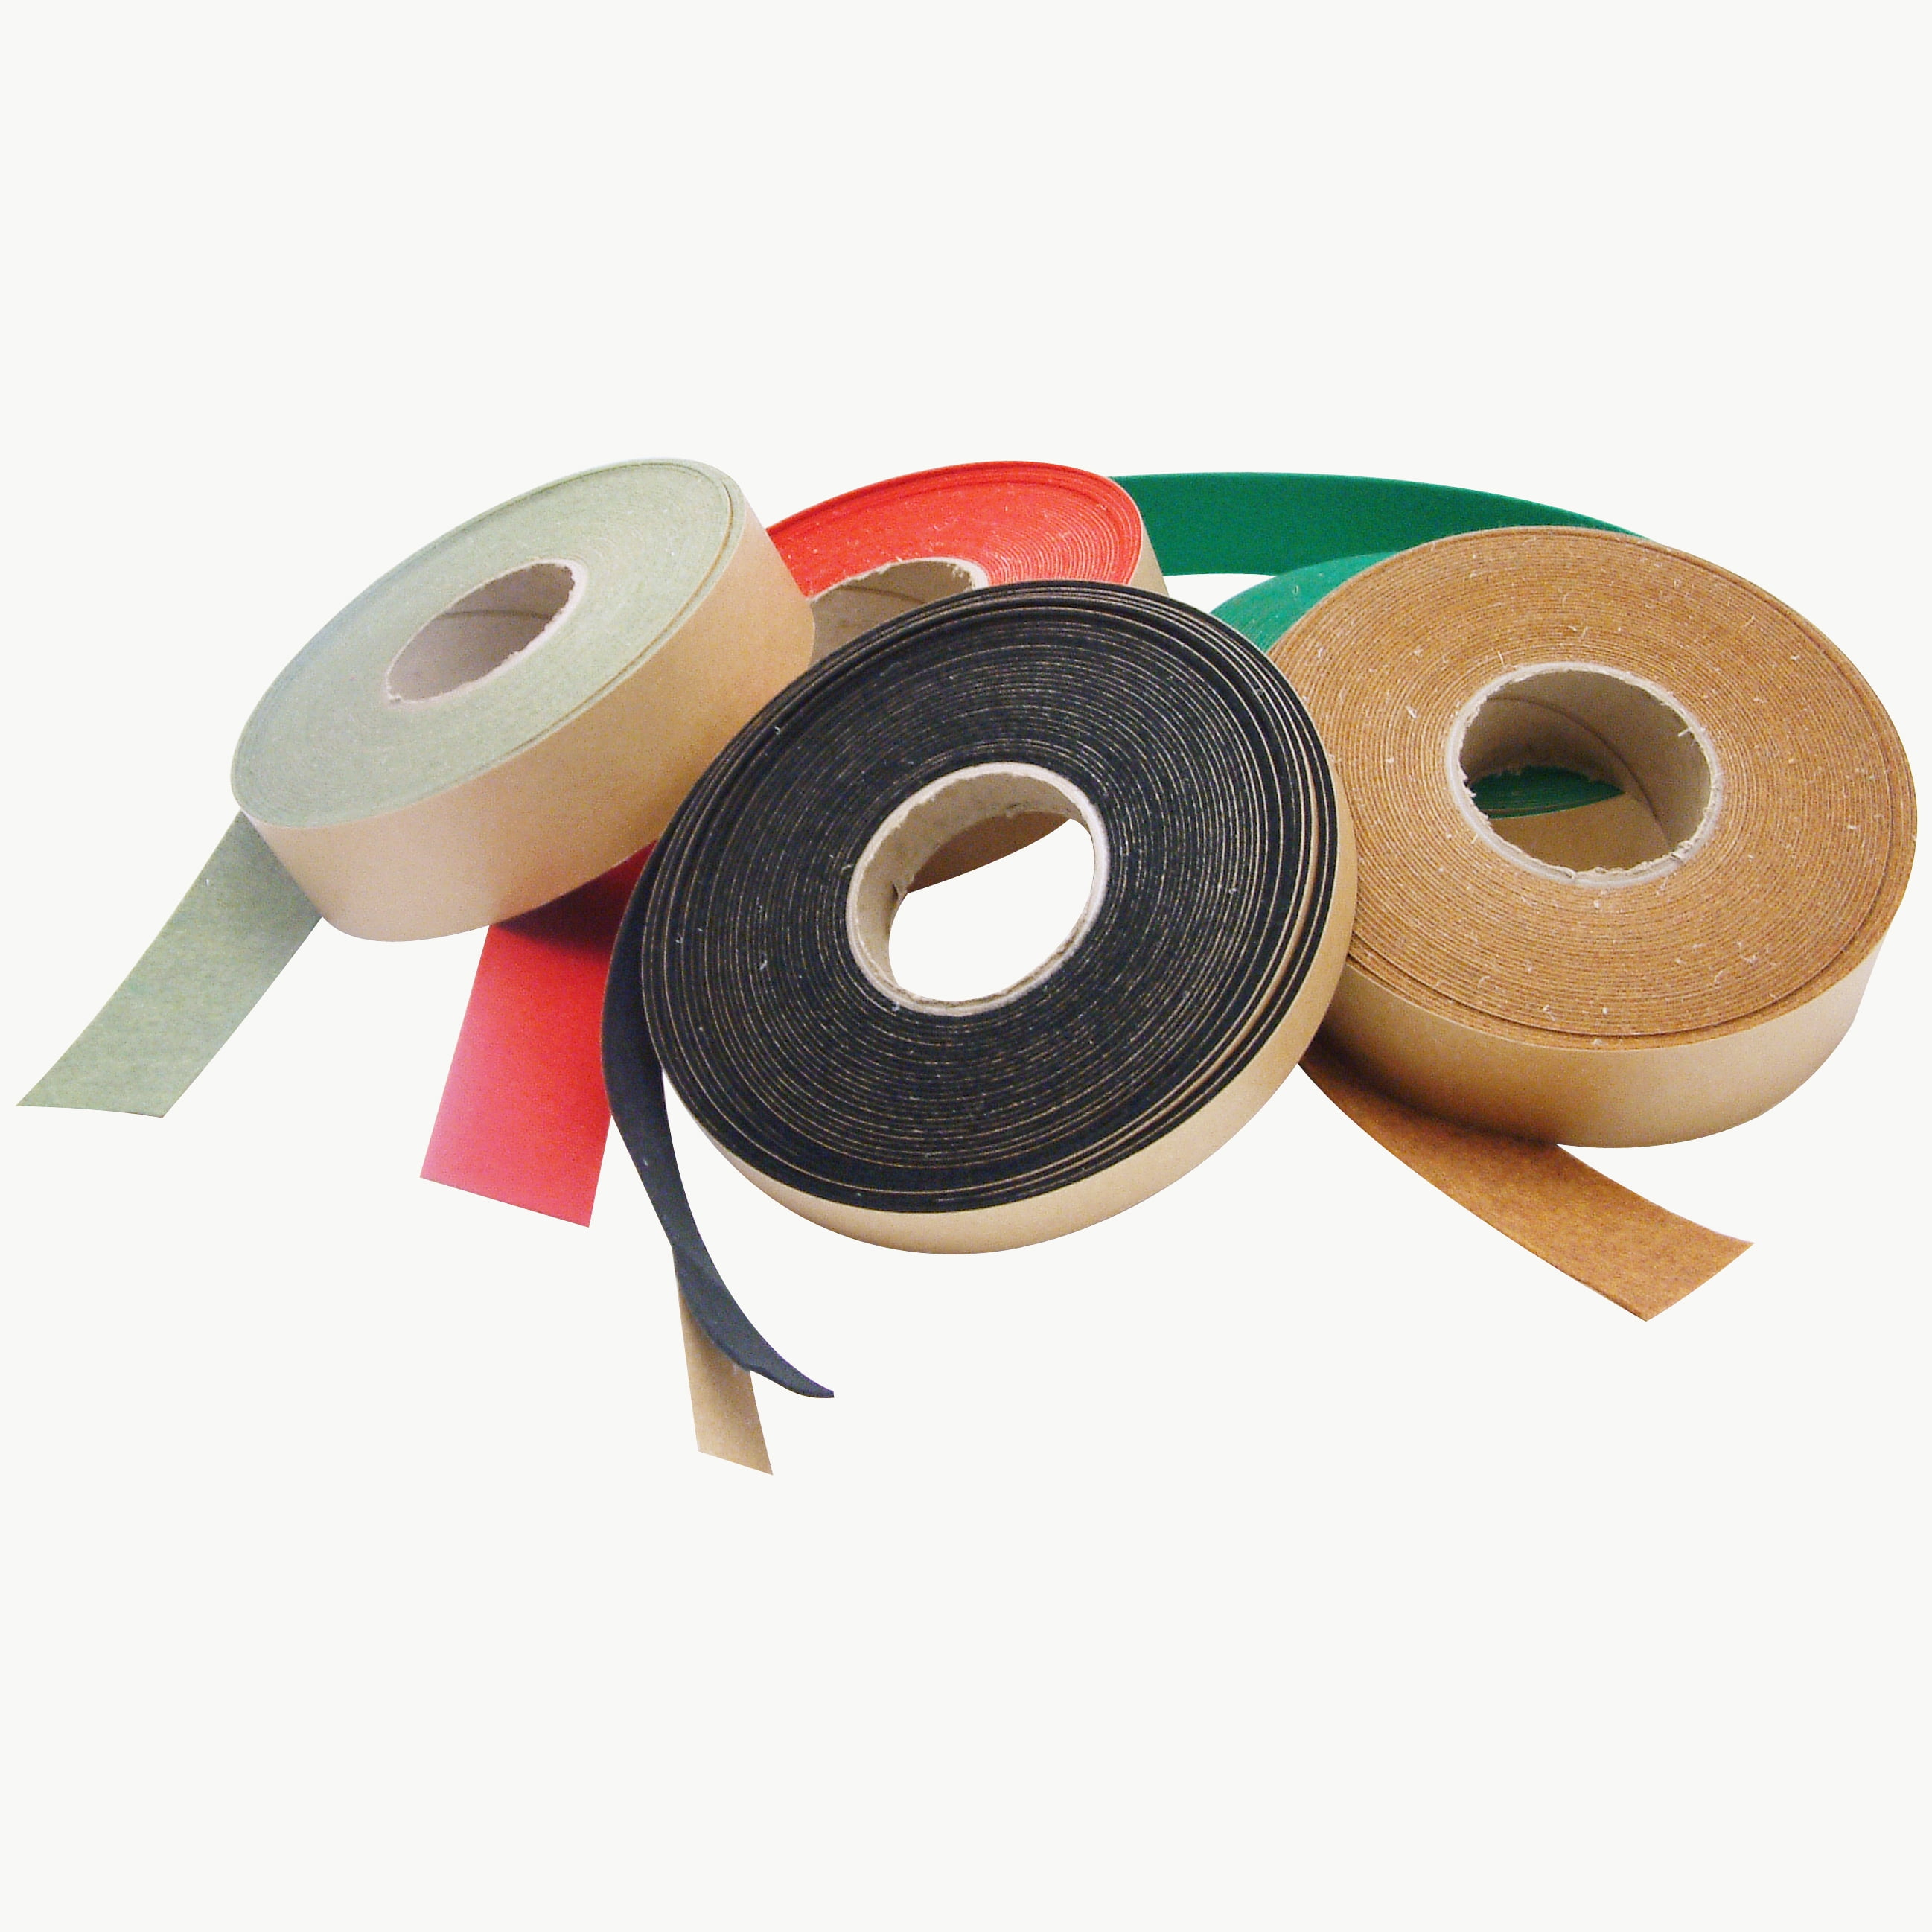 921838-3 Wool Felt Strip: 2 in W x 10 ft L, 1/8 in Thick, F5, Acrylic  Adhesive Backing, Off White, 20A to 30A